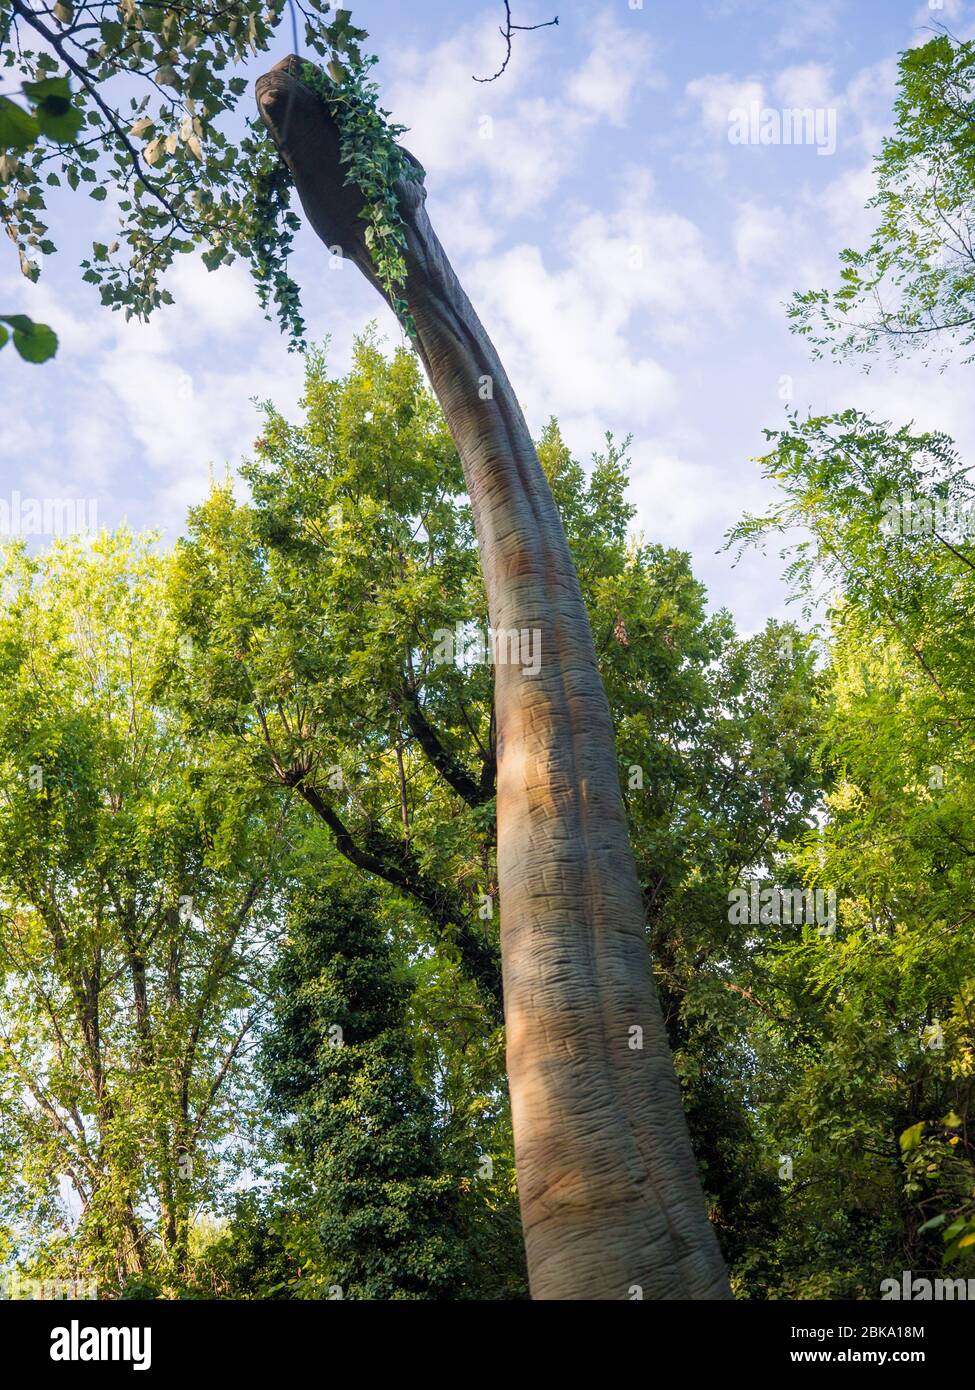 Verona, Italy - September 7, 2020: Detail of brachiosaurus that feeds on the leaves of the forest trees. Stock Photo